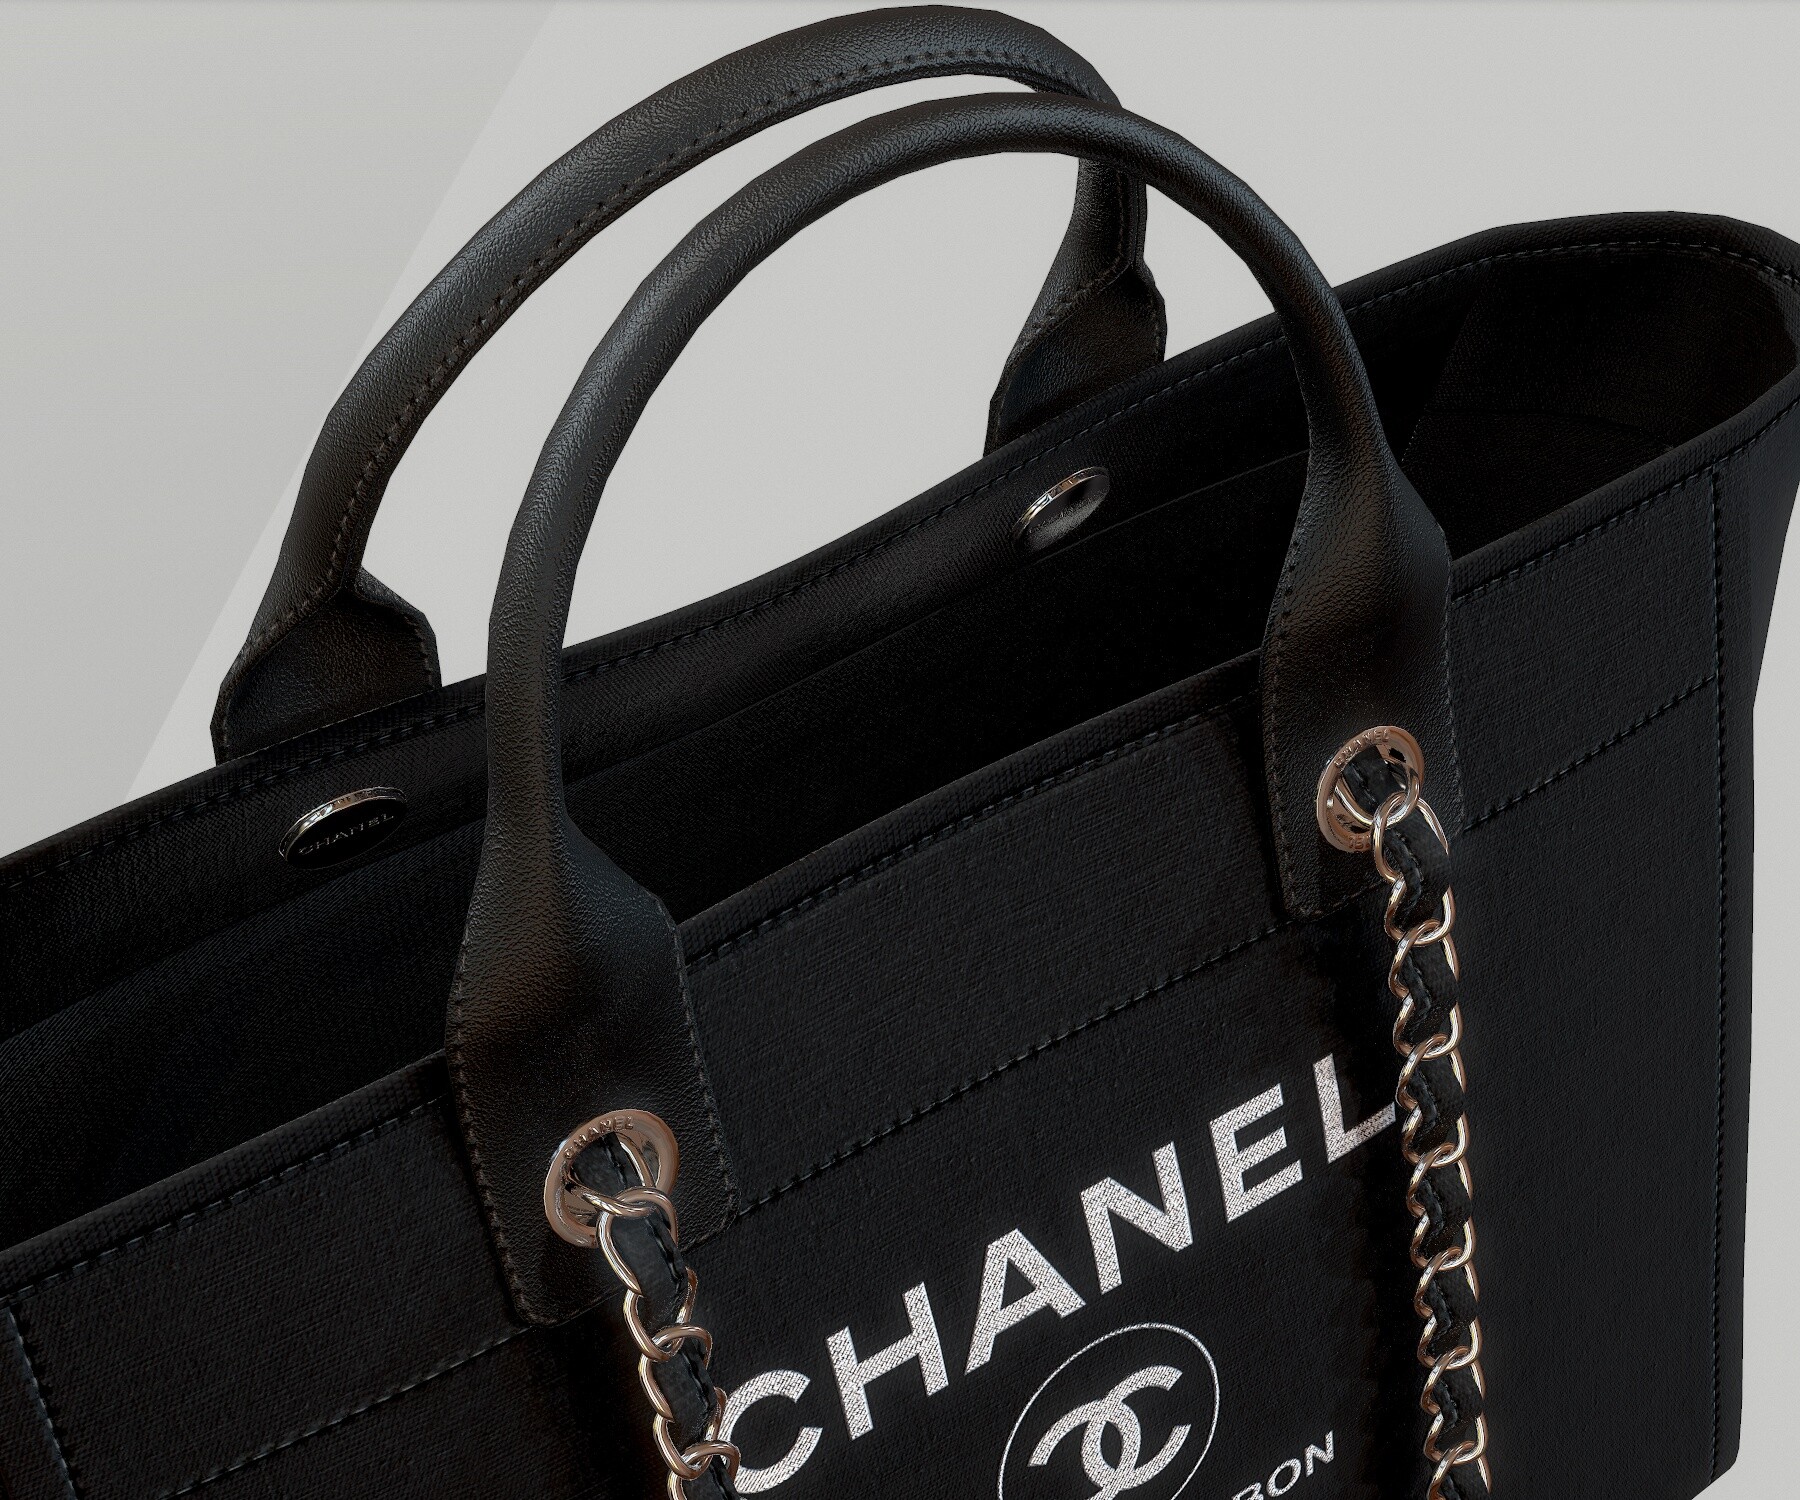 3D Model Collection CHANEL Shoper Bag Canvas Deauville Tote VR / AR /  low-poly